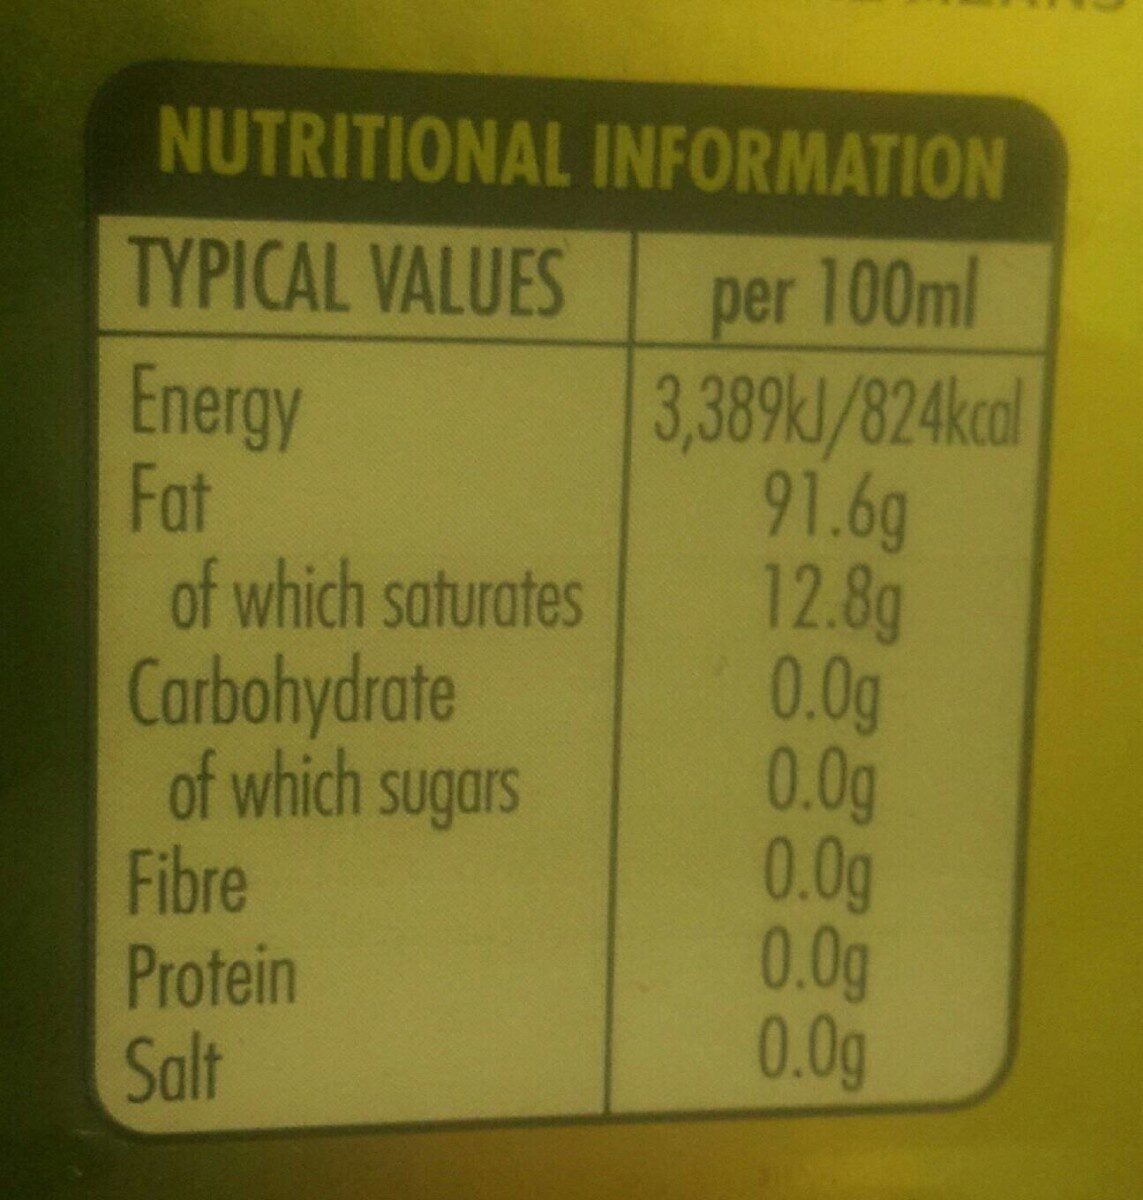 Extra virgin olive oil - Nutrition facts